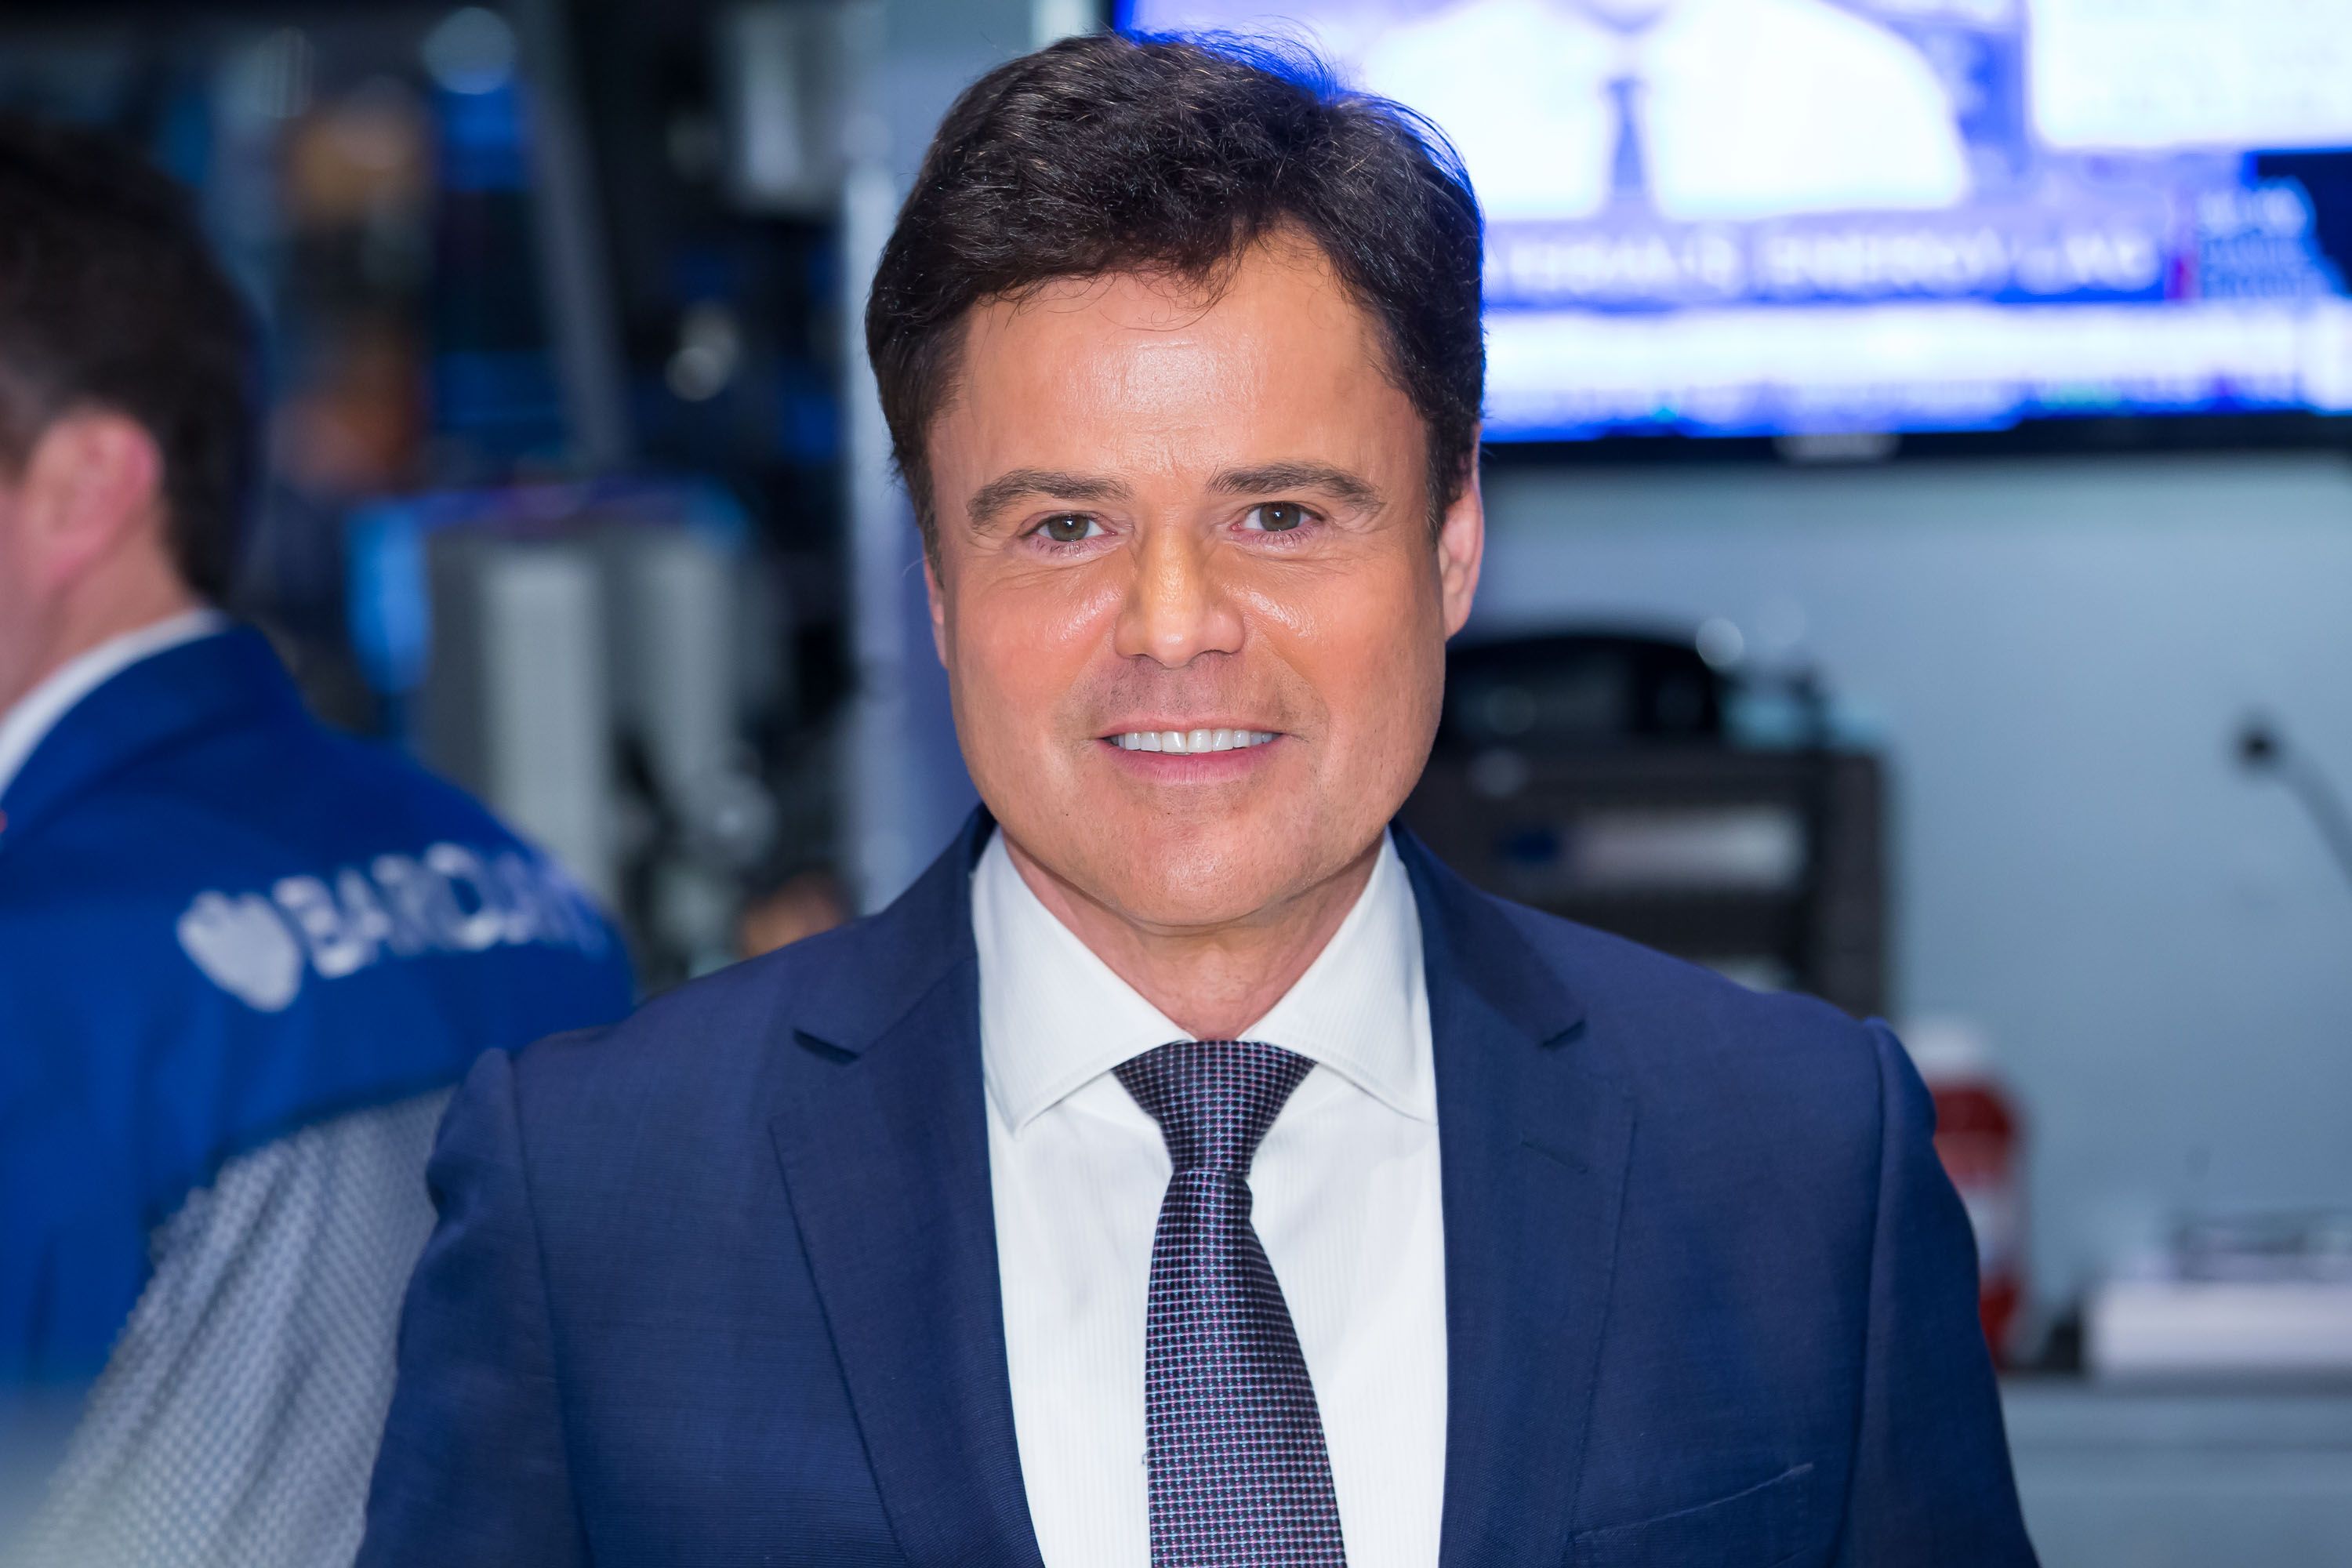 Donny Osmond rang the Closing Bell at New York Stock Exchange on January 13, 2015 | Photo: Getty Images